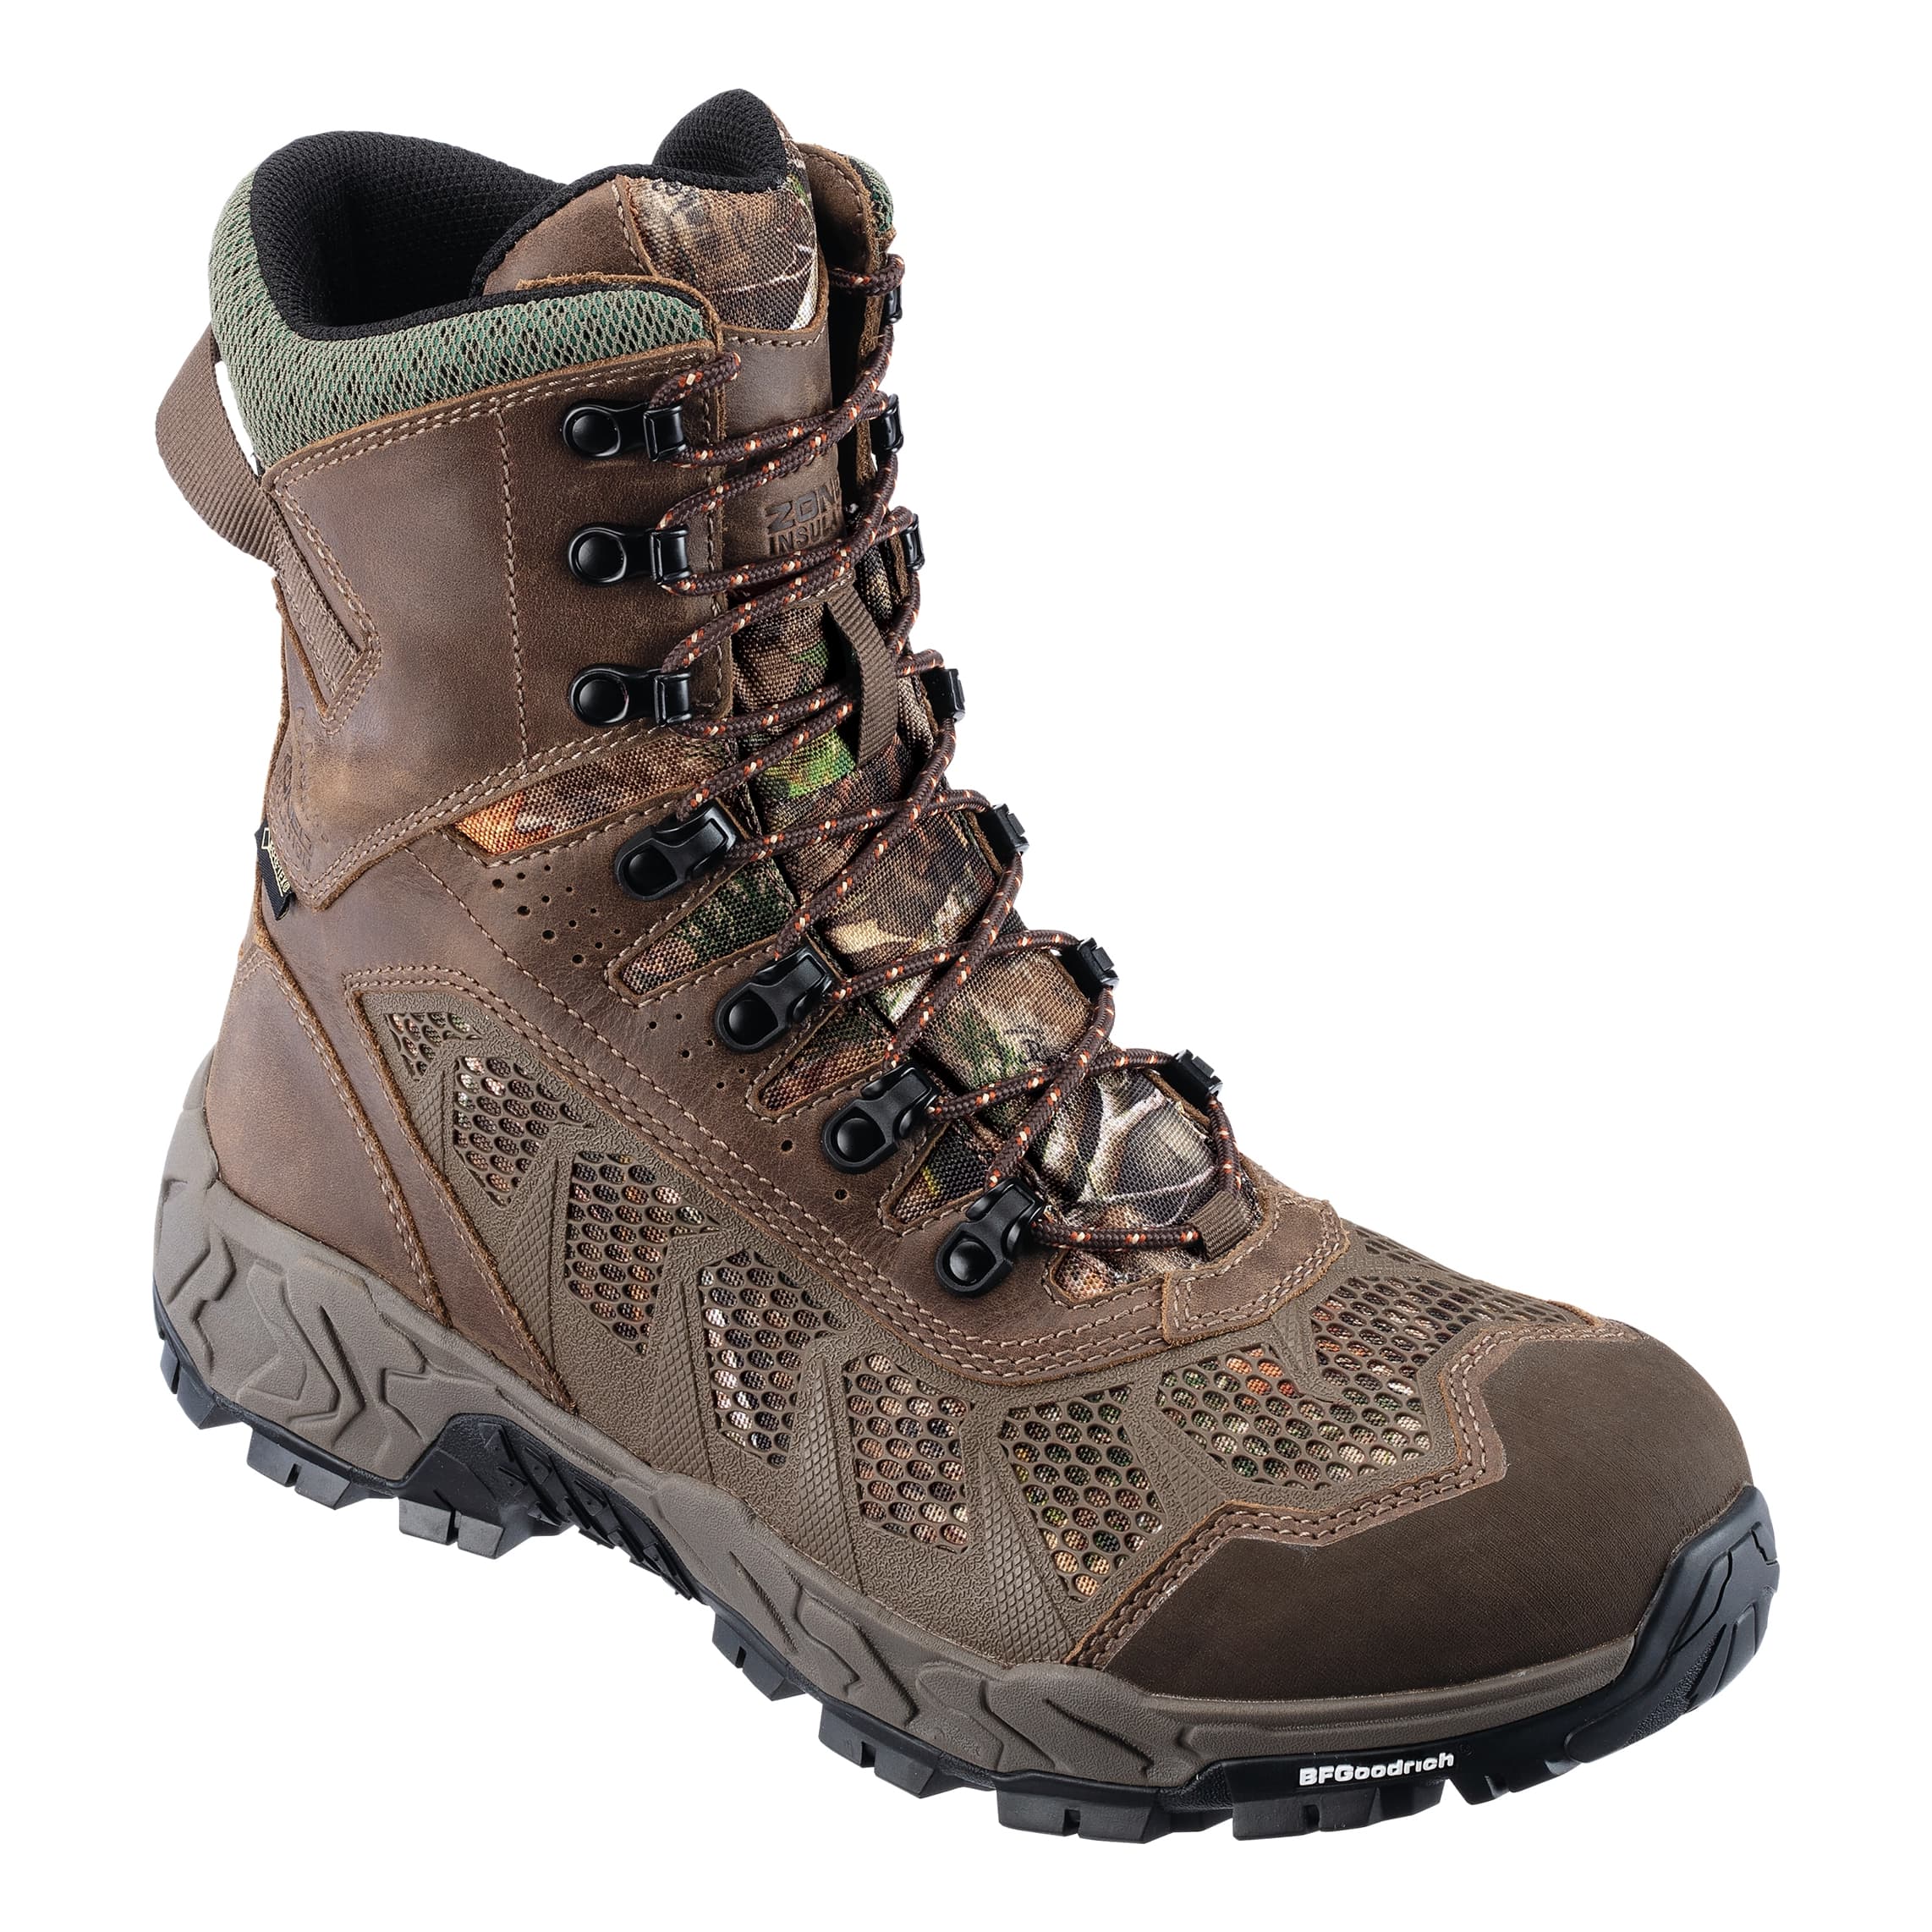 Cabela’s® Men’s Treadfast GORE-TEX® Insulated Hunting Boots | Cabela's ...